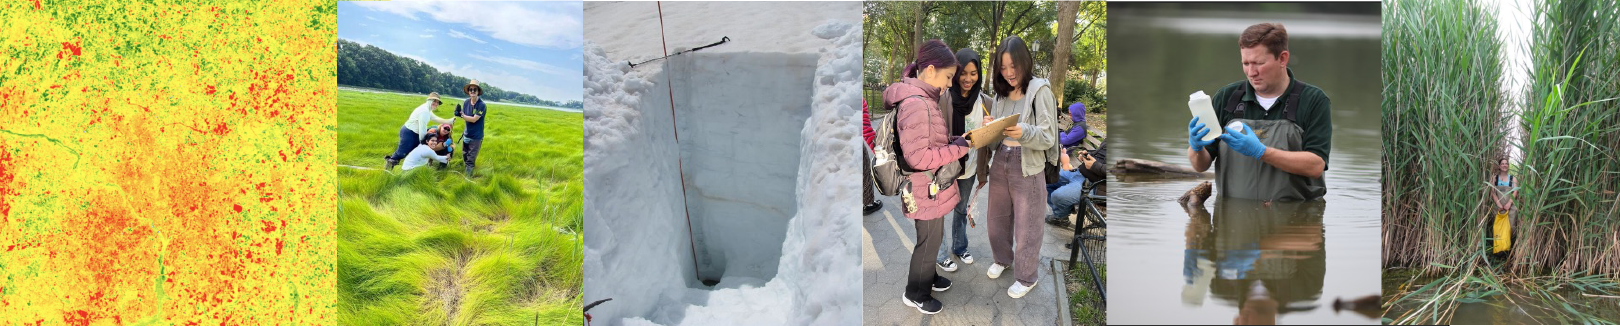 Series of 6 images depicting the following CCRI research projects. The first visualization is of NASA land surface temperature data. The second image shows three students obtaining field data in the wetlands along the Hudson Bay. The third image is field instrumentation for collecting snow depth. The fourth is of students collecting thermal data in New York City. The fifth is of a student collecting samples within a lake. The 6th is of a student walking through the estuary carrying a dry bag for samples and instrumentation.